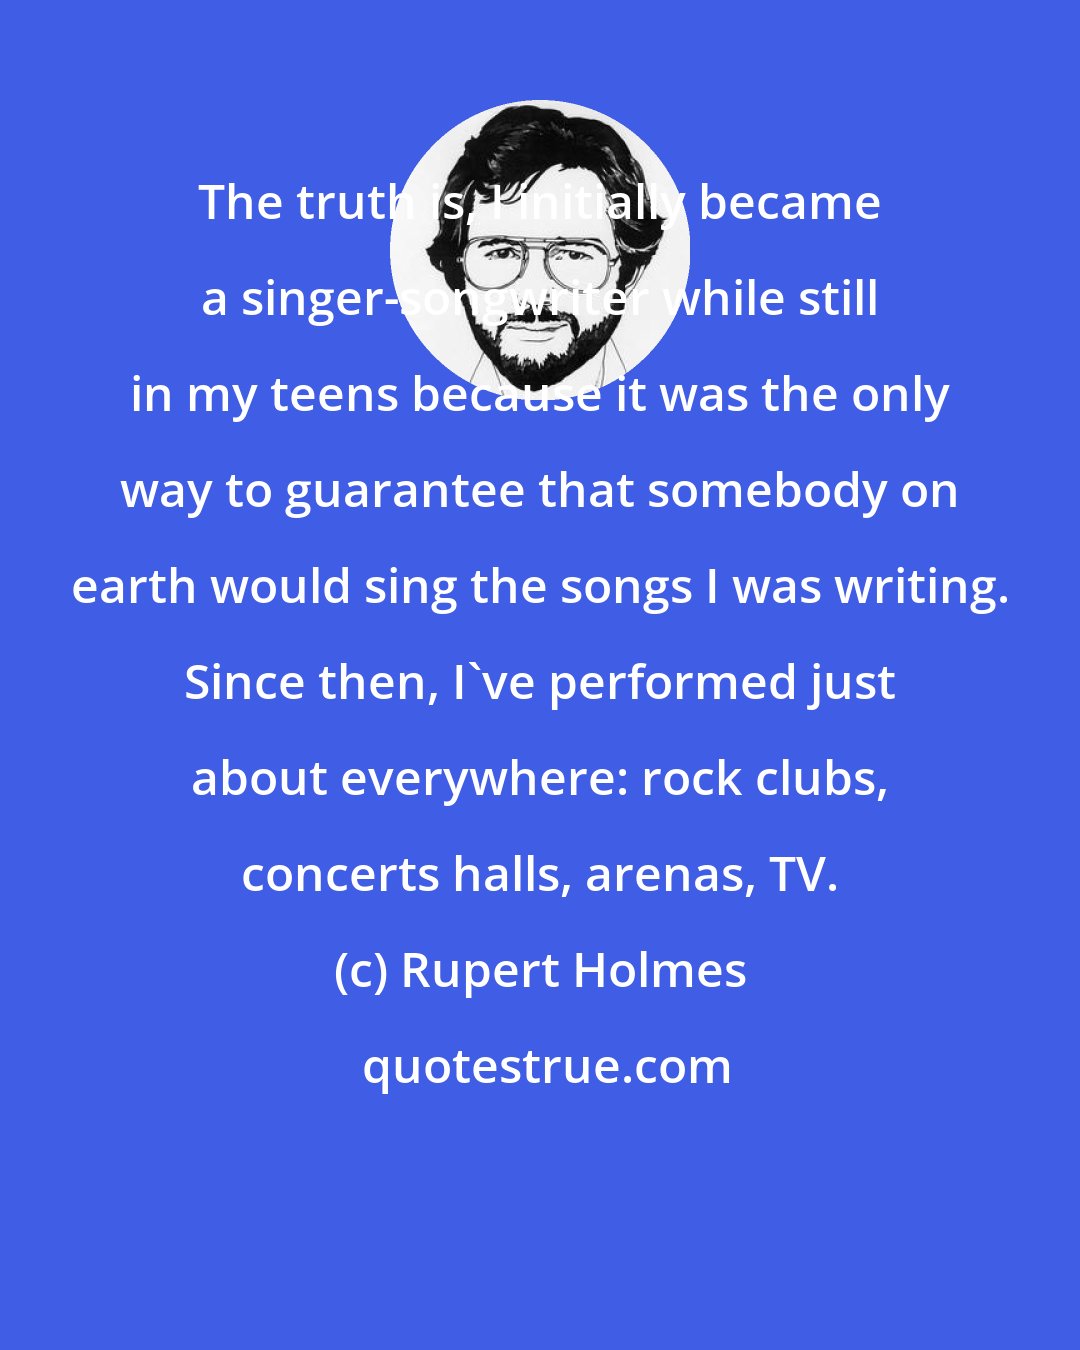 Rupert Holmes: The truth is, I initially became a singer-songwriter while still in my teens because it was the only way to guarantee that somebody on earth would sing the songs I was writing. Since then, I've performed just about everywhere: rock clubs, concerts halls, arenas, TV.